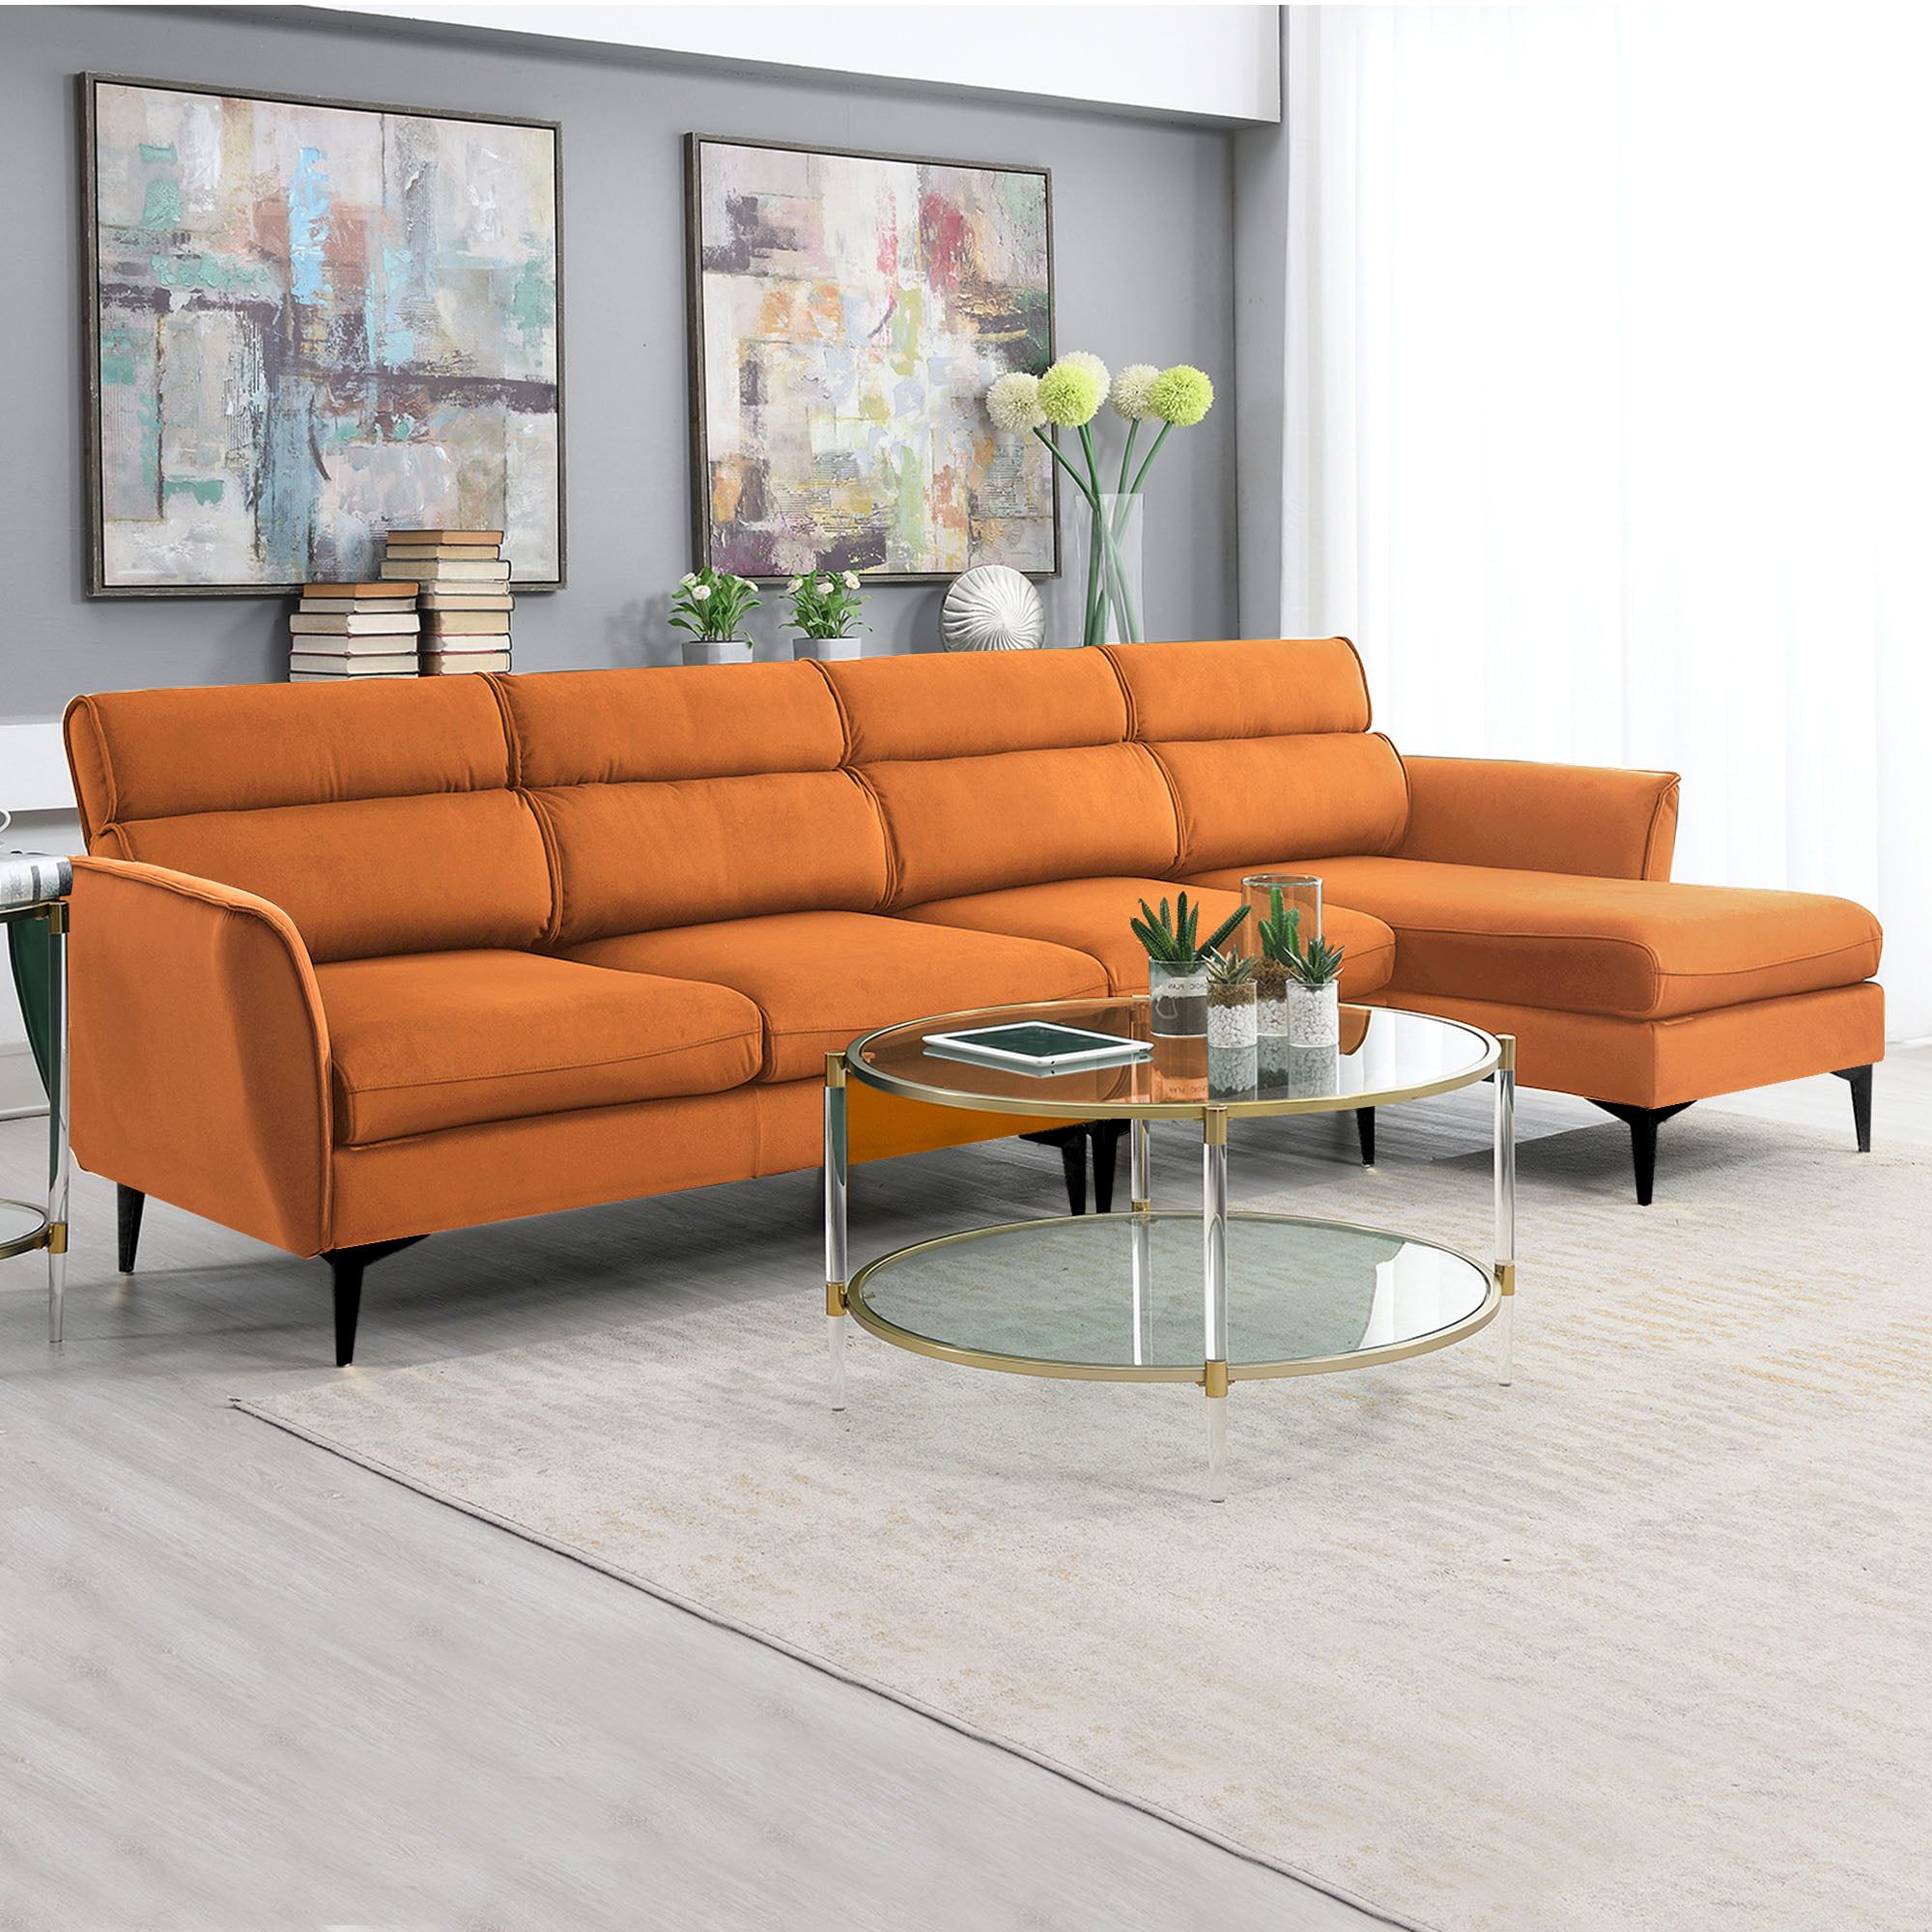 111"l Convertible Sectional Sofa Couch, Flannel L Shaped Couch With  Left/right Chaise, Modern Heavy Duty 4 Seater Sectional Couch, Kamida Sectional  Couch Furniture For Living Room, Orange – Walmart With Regard To Heavy Duty Sectional Couches (View 4 of 20)